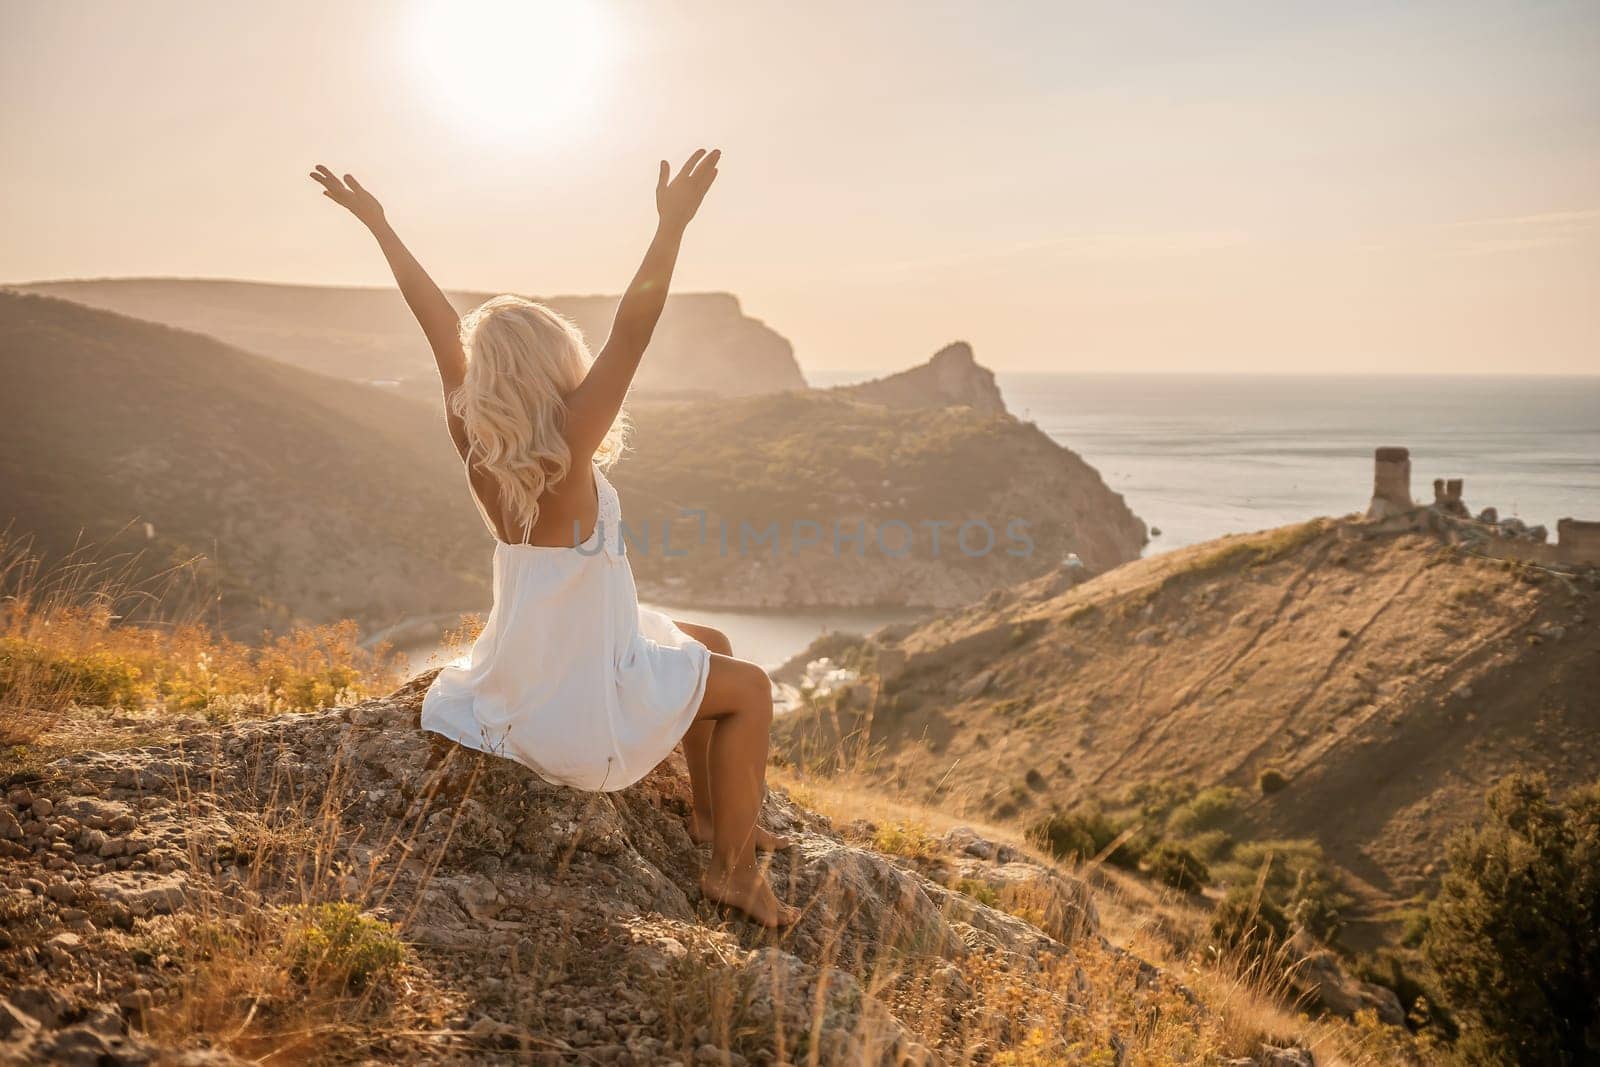 Happy woman is sitting on a hillside, wearing a white dress. She is surrounded by a beautiful landscape, with a body of sea in the background. Concept of peace and happiness. by Matiunina